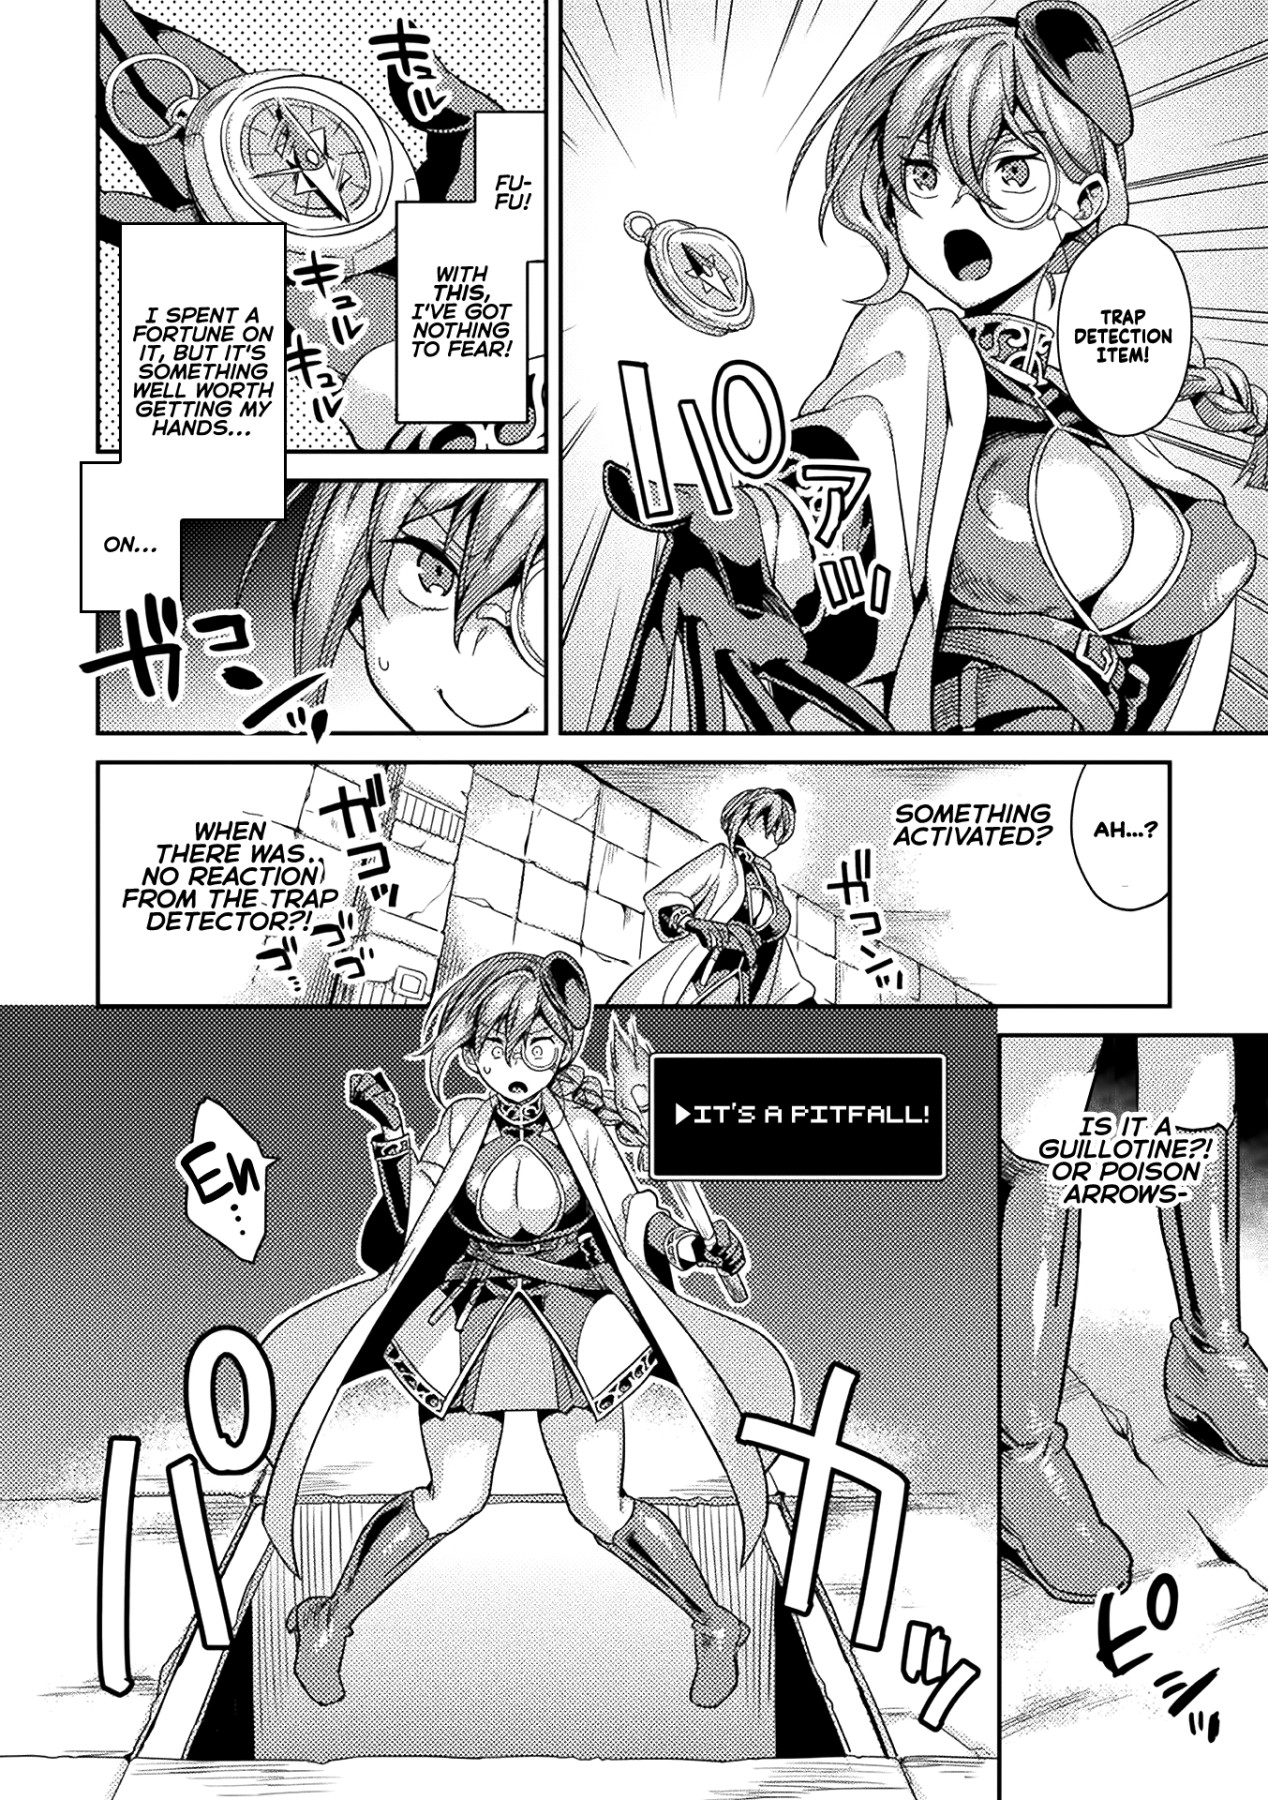 Hentai Manga Comic-Genderbent Archaeologist <on expedition> -Forced to Cum Nonstop in Perverted Ancient Ruins--Read-2